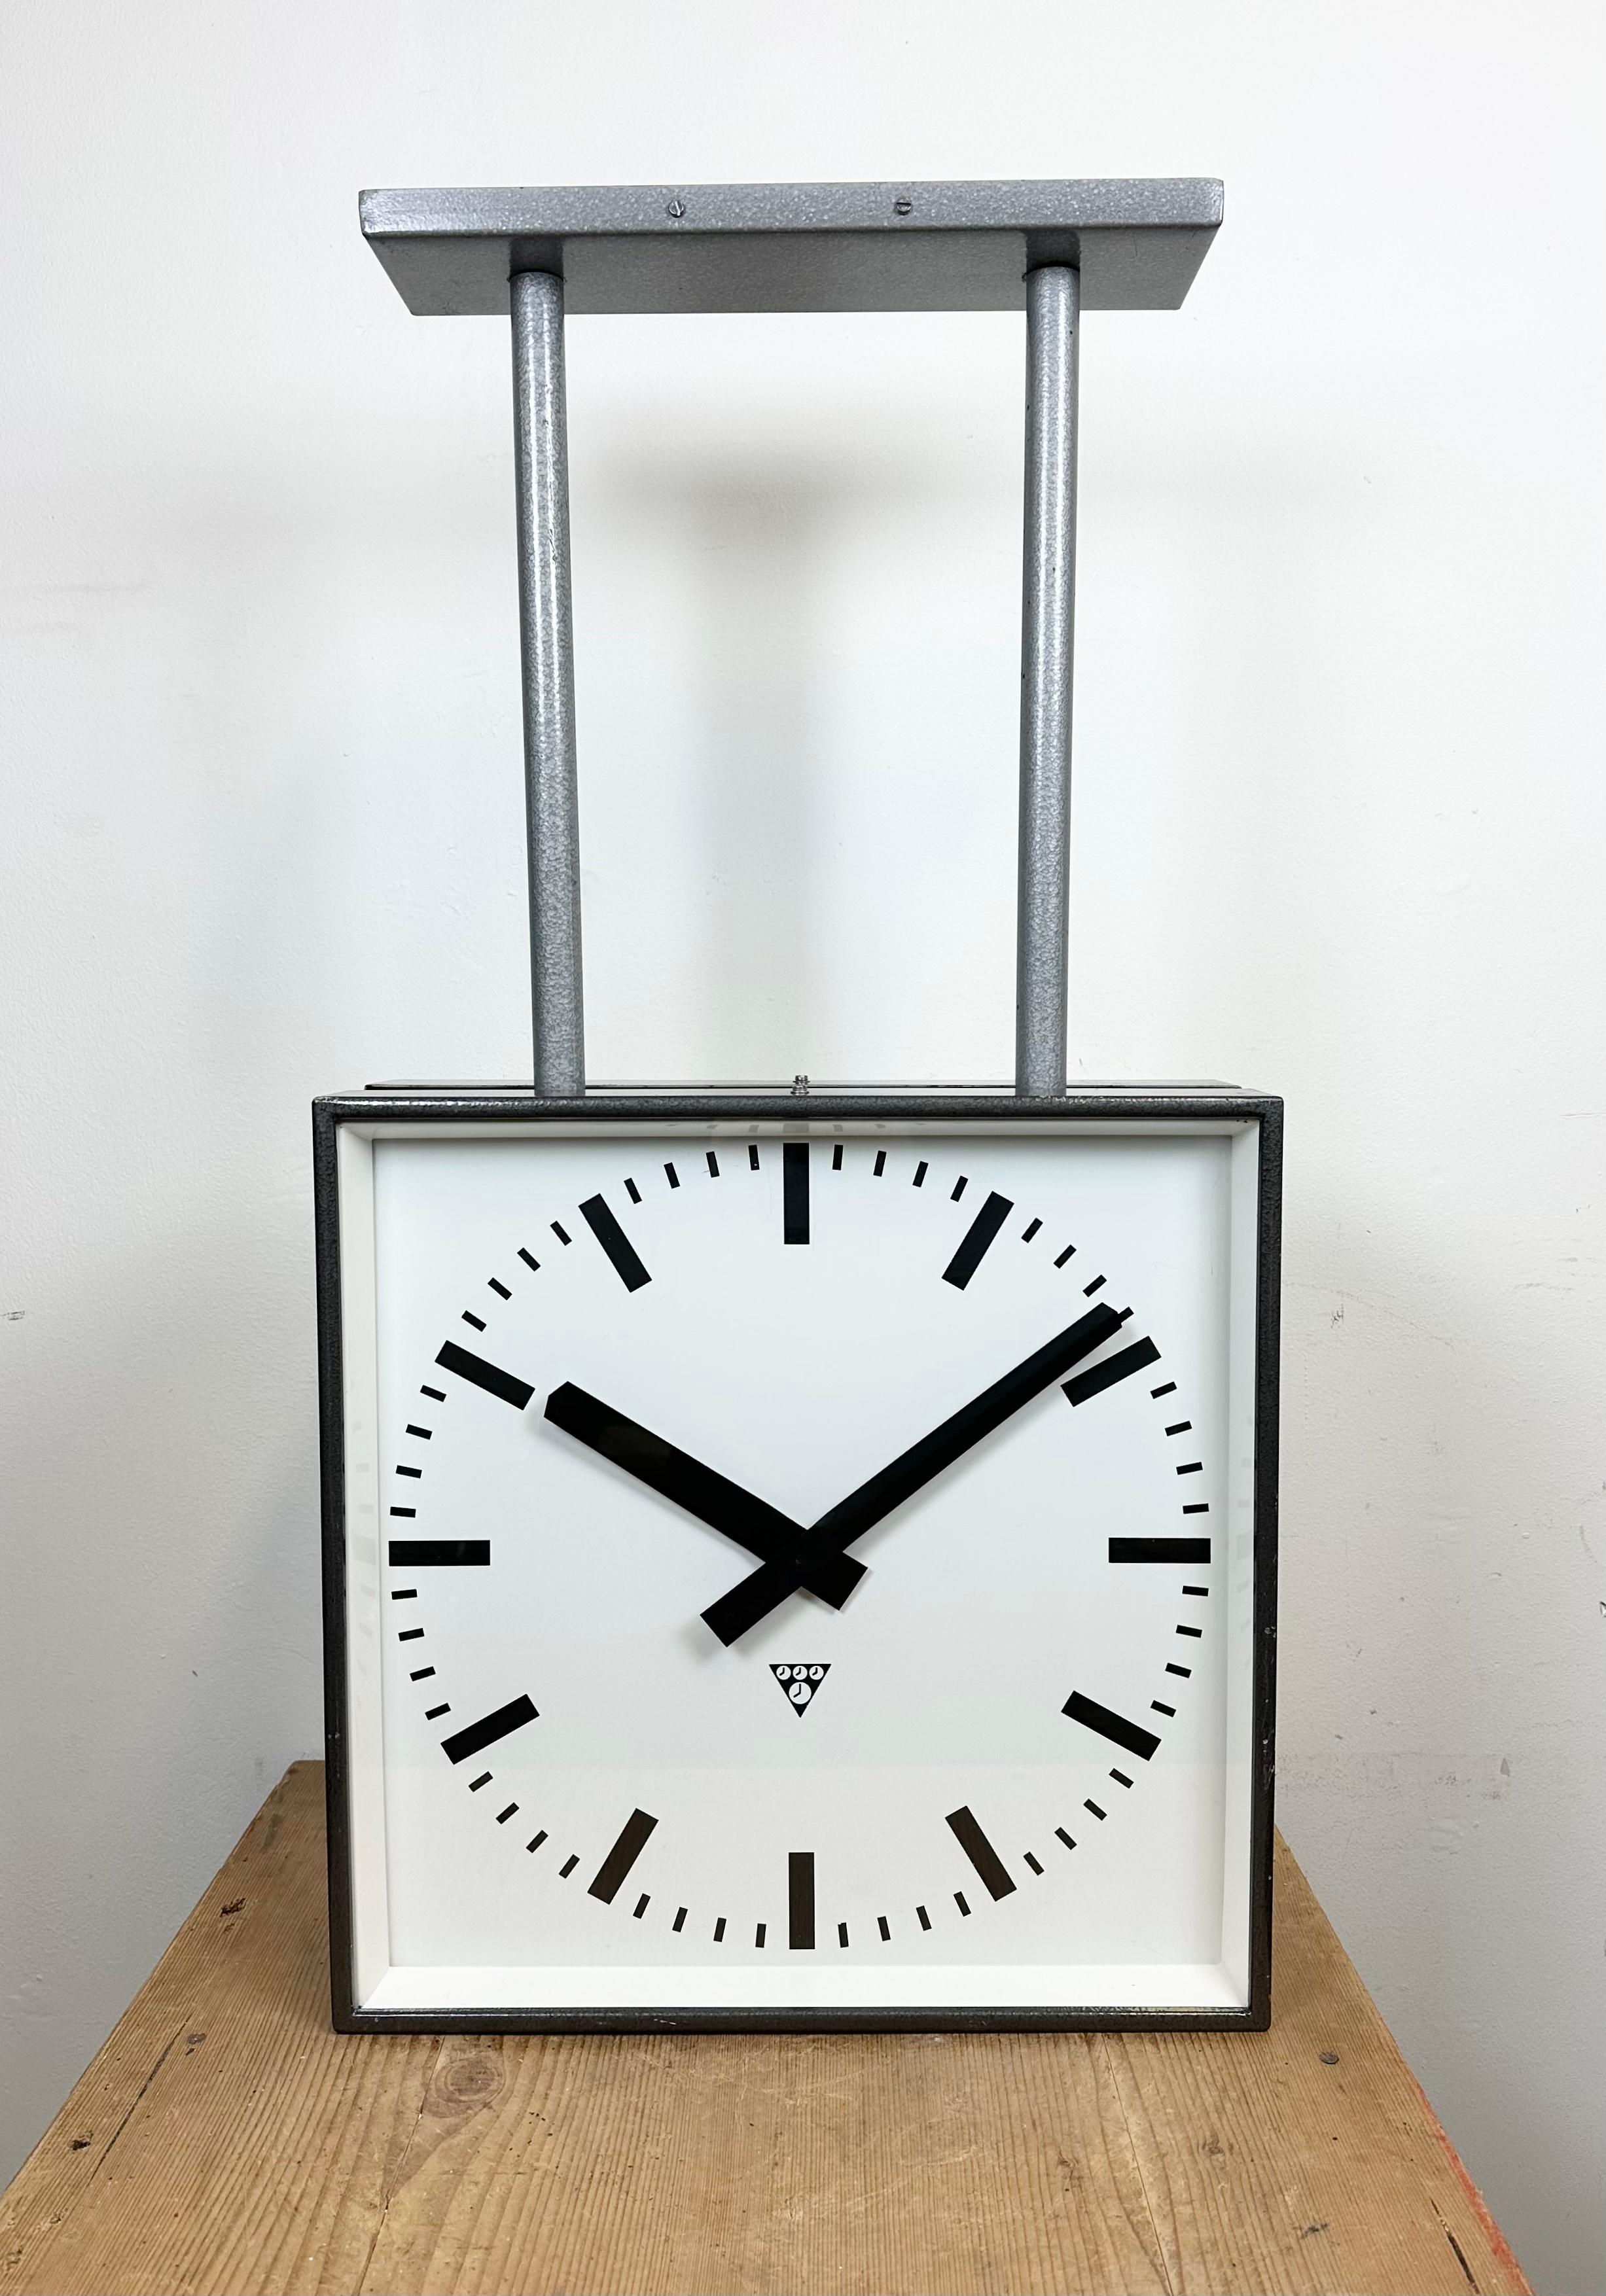 This square double-sided railway, school or factory wall clock was produced by Pragotron, in former Czechoslovakia, during the 1970s. The piece features a grey metal body, a dark grey hammerpaint clock frames, a clear glass covers, and an aluminum